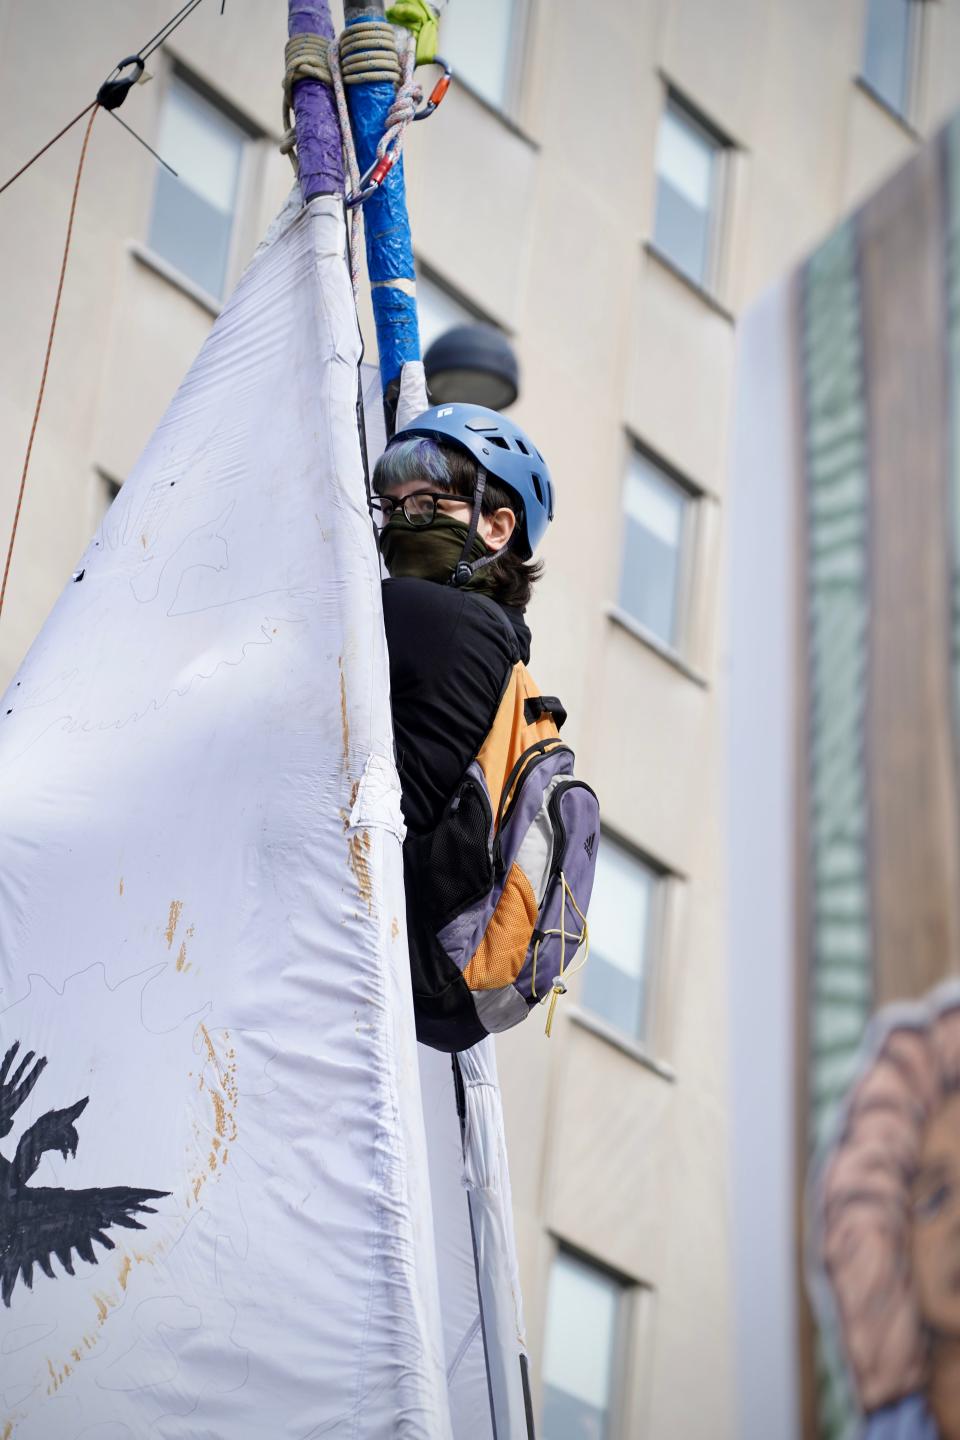 Nony Rose Salyer, 31, hanging from a tripod during an environmental protest outside P&G's headquarters on Tuesday, June 7, 2022.